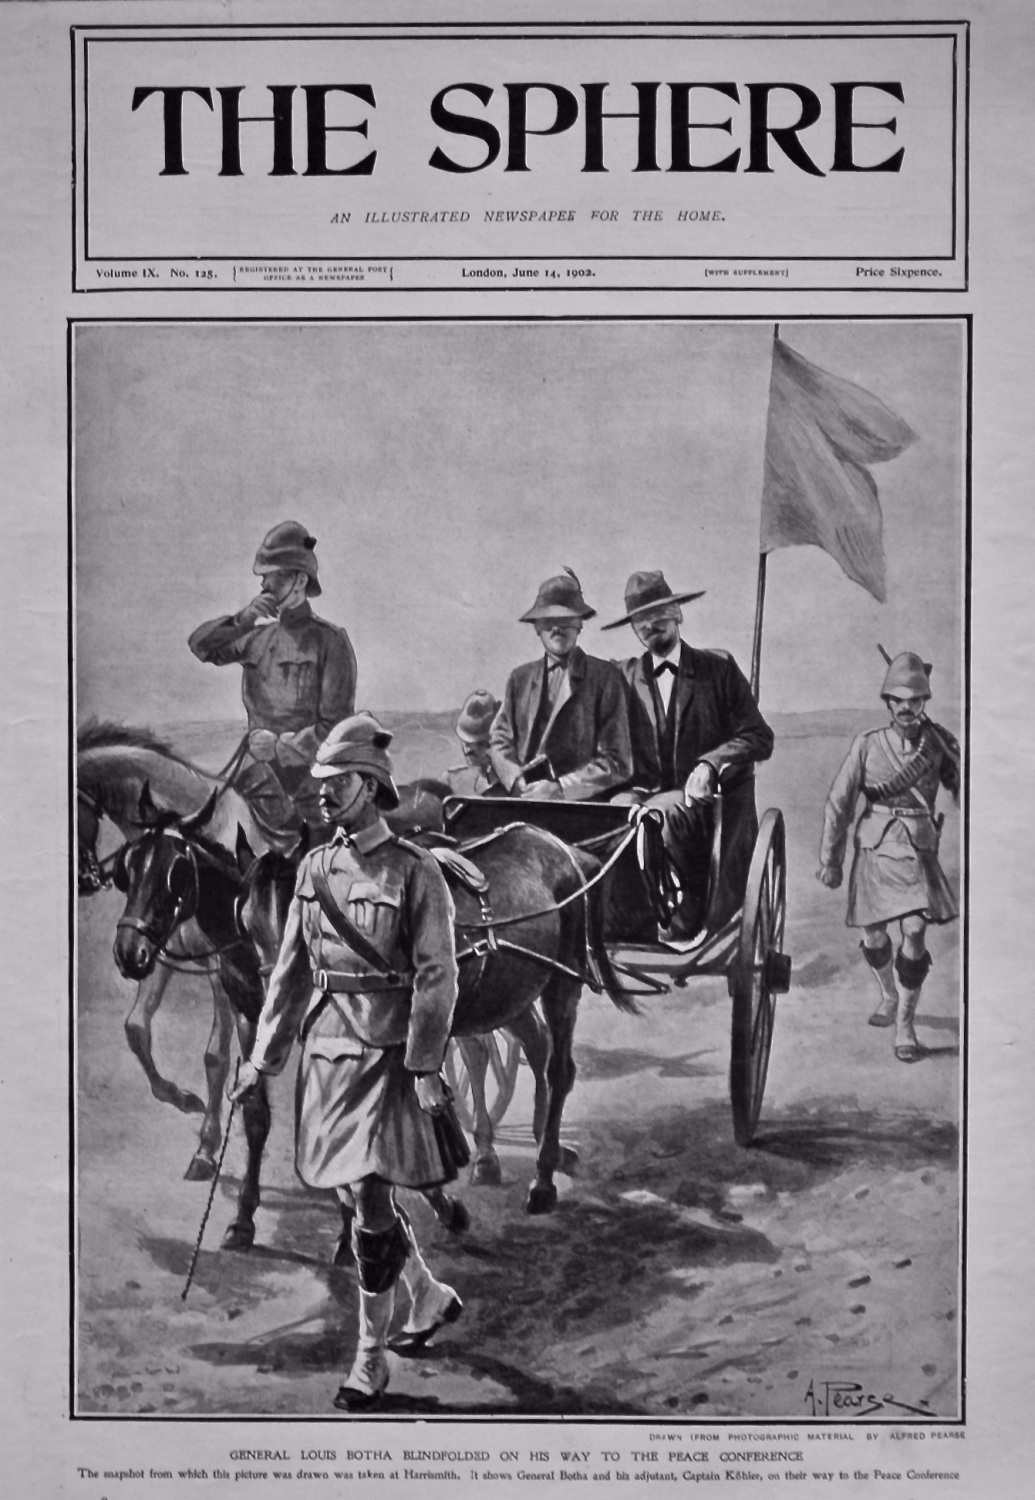 General Louis Botha Blindfolded on his way to the Peace Conference. 1902.